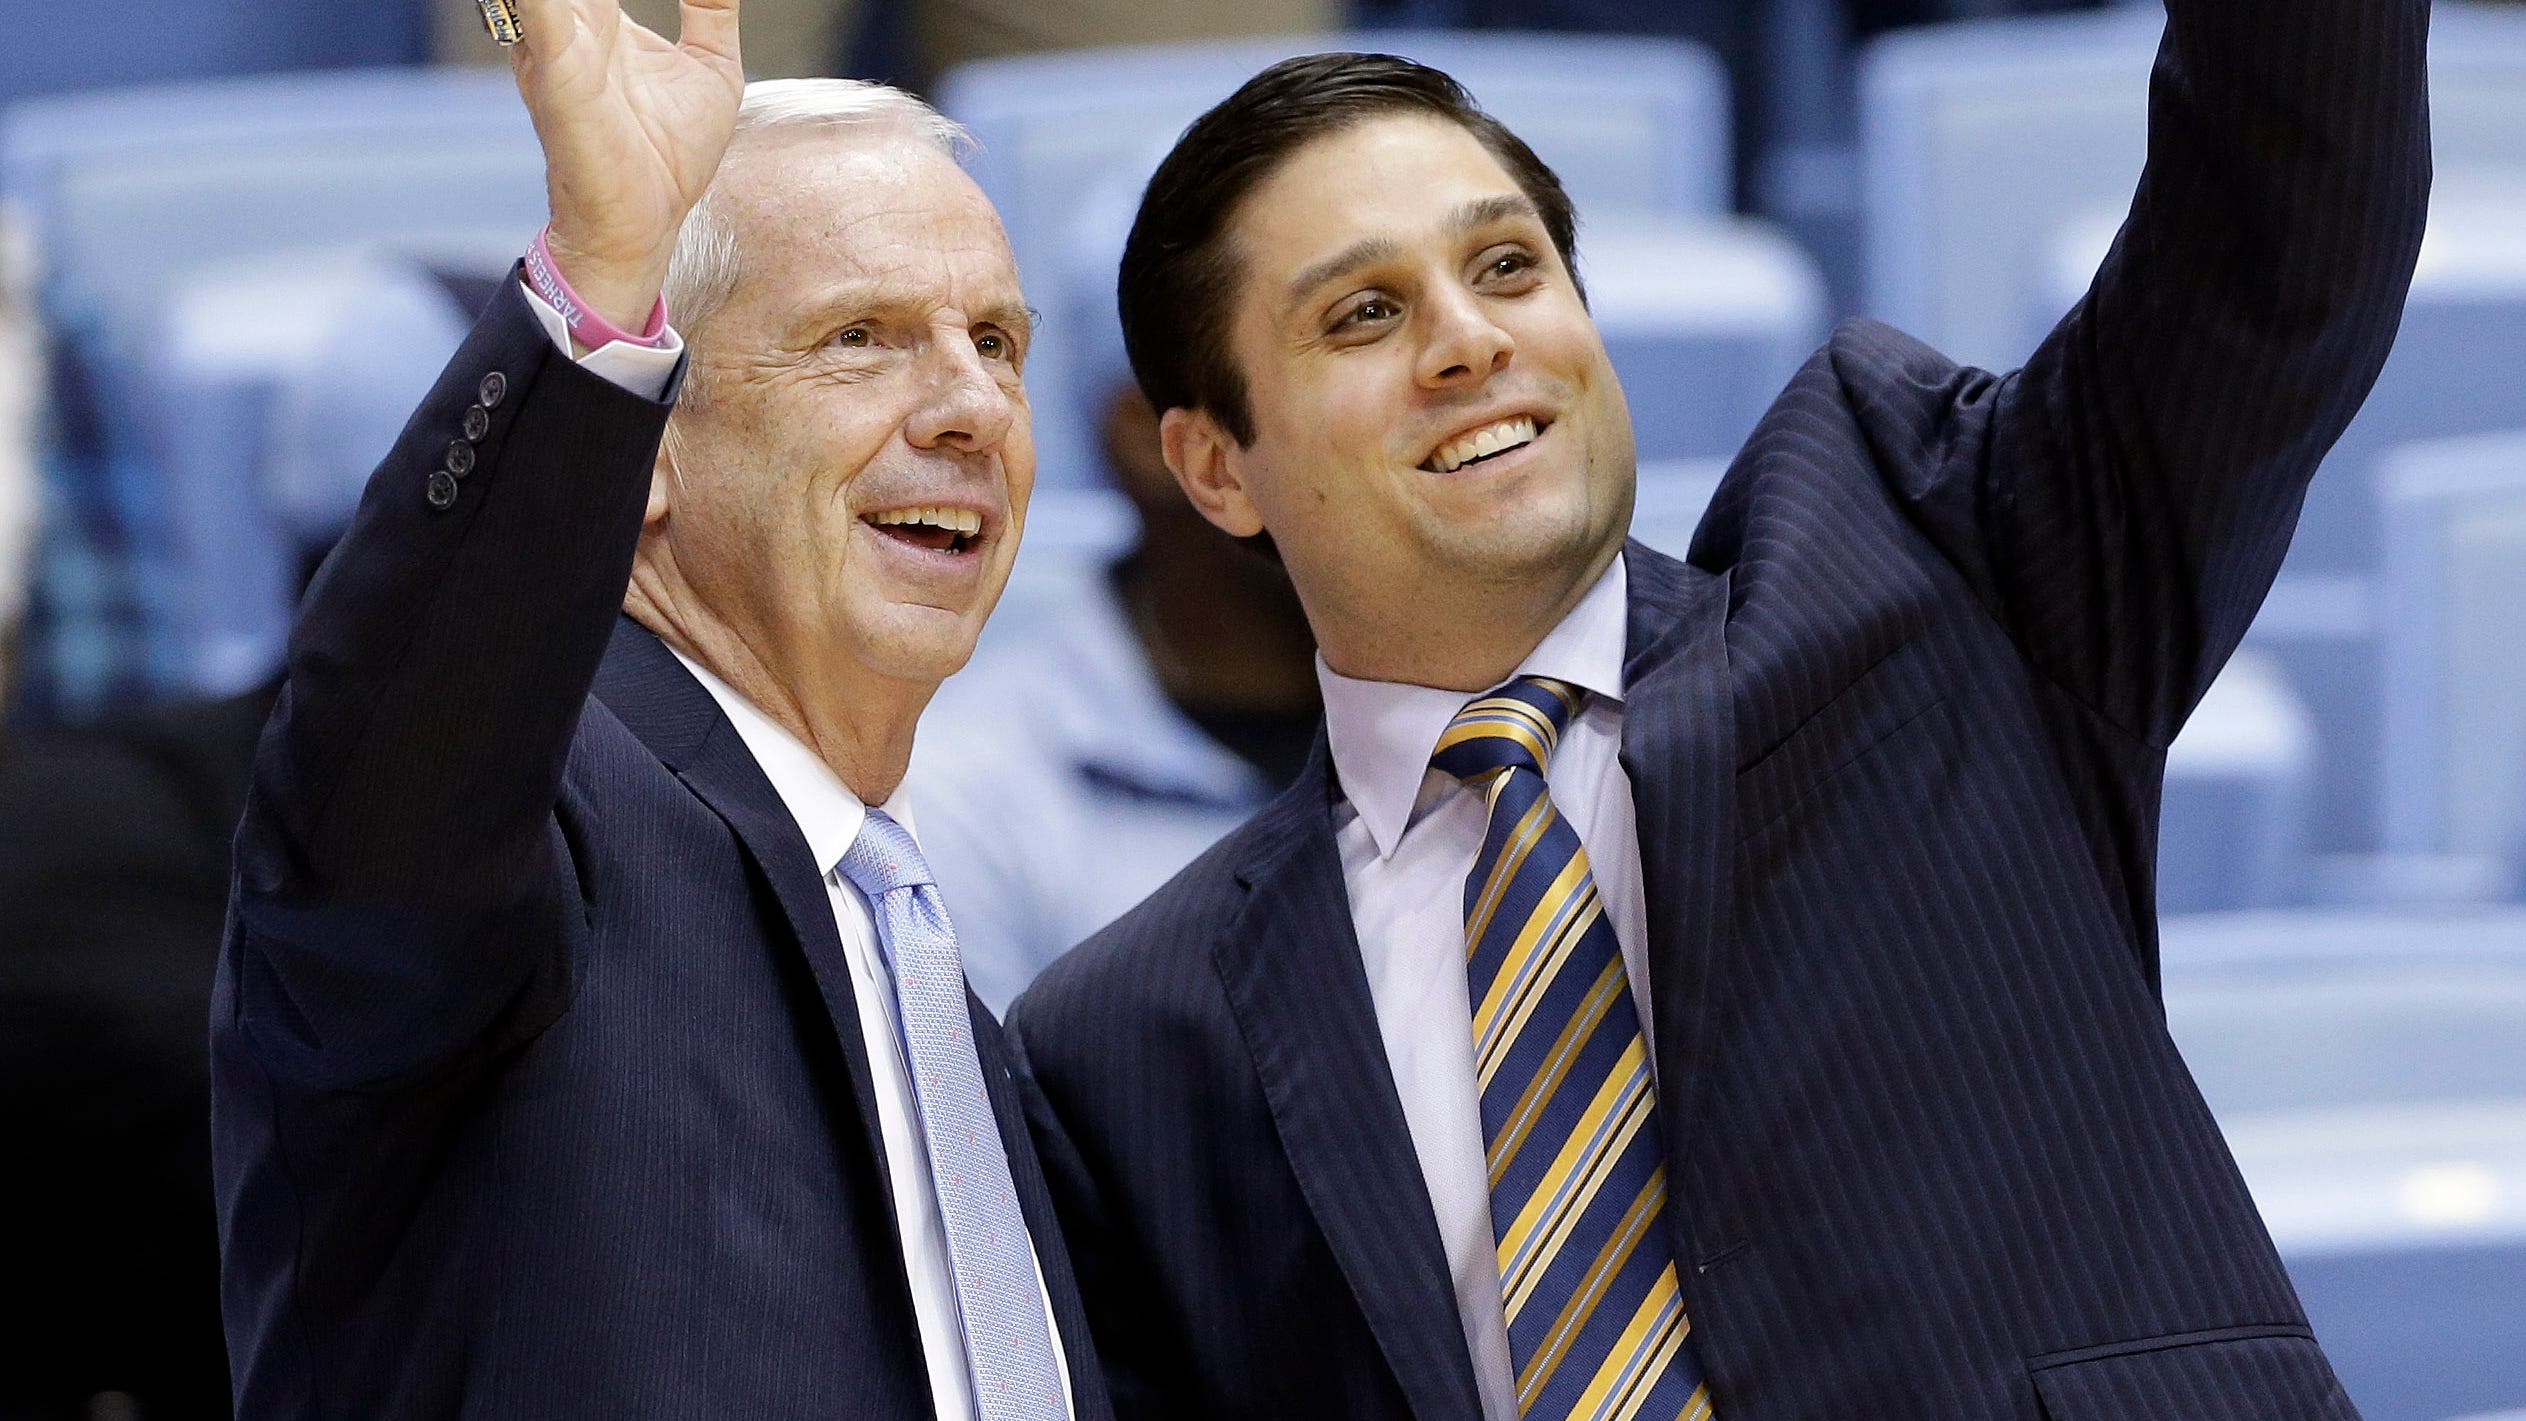 Roy Williams on Cincinnati coach Wes Miller: 'Consider this the highest recommendation you can get'